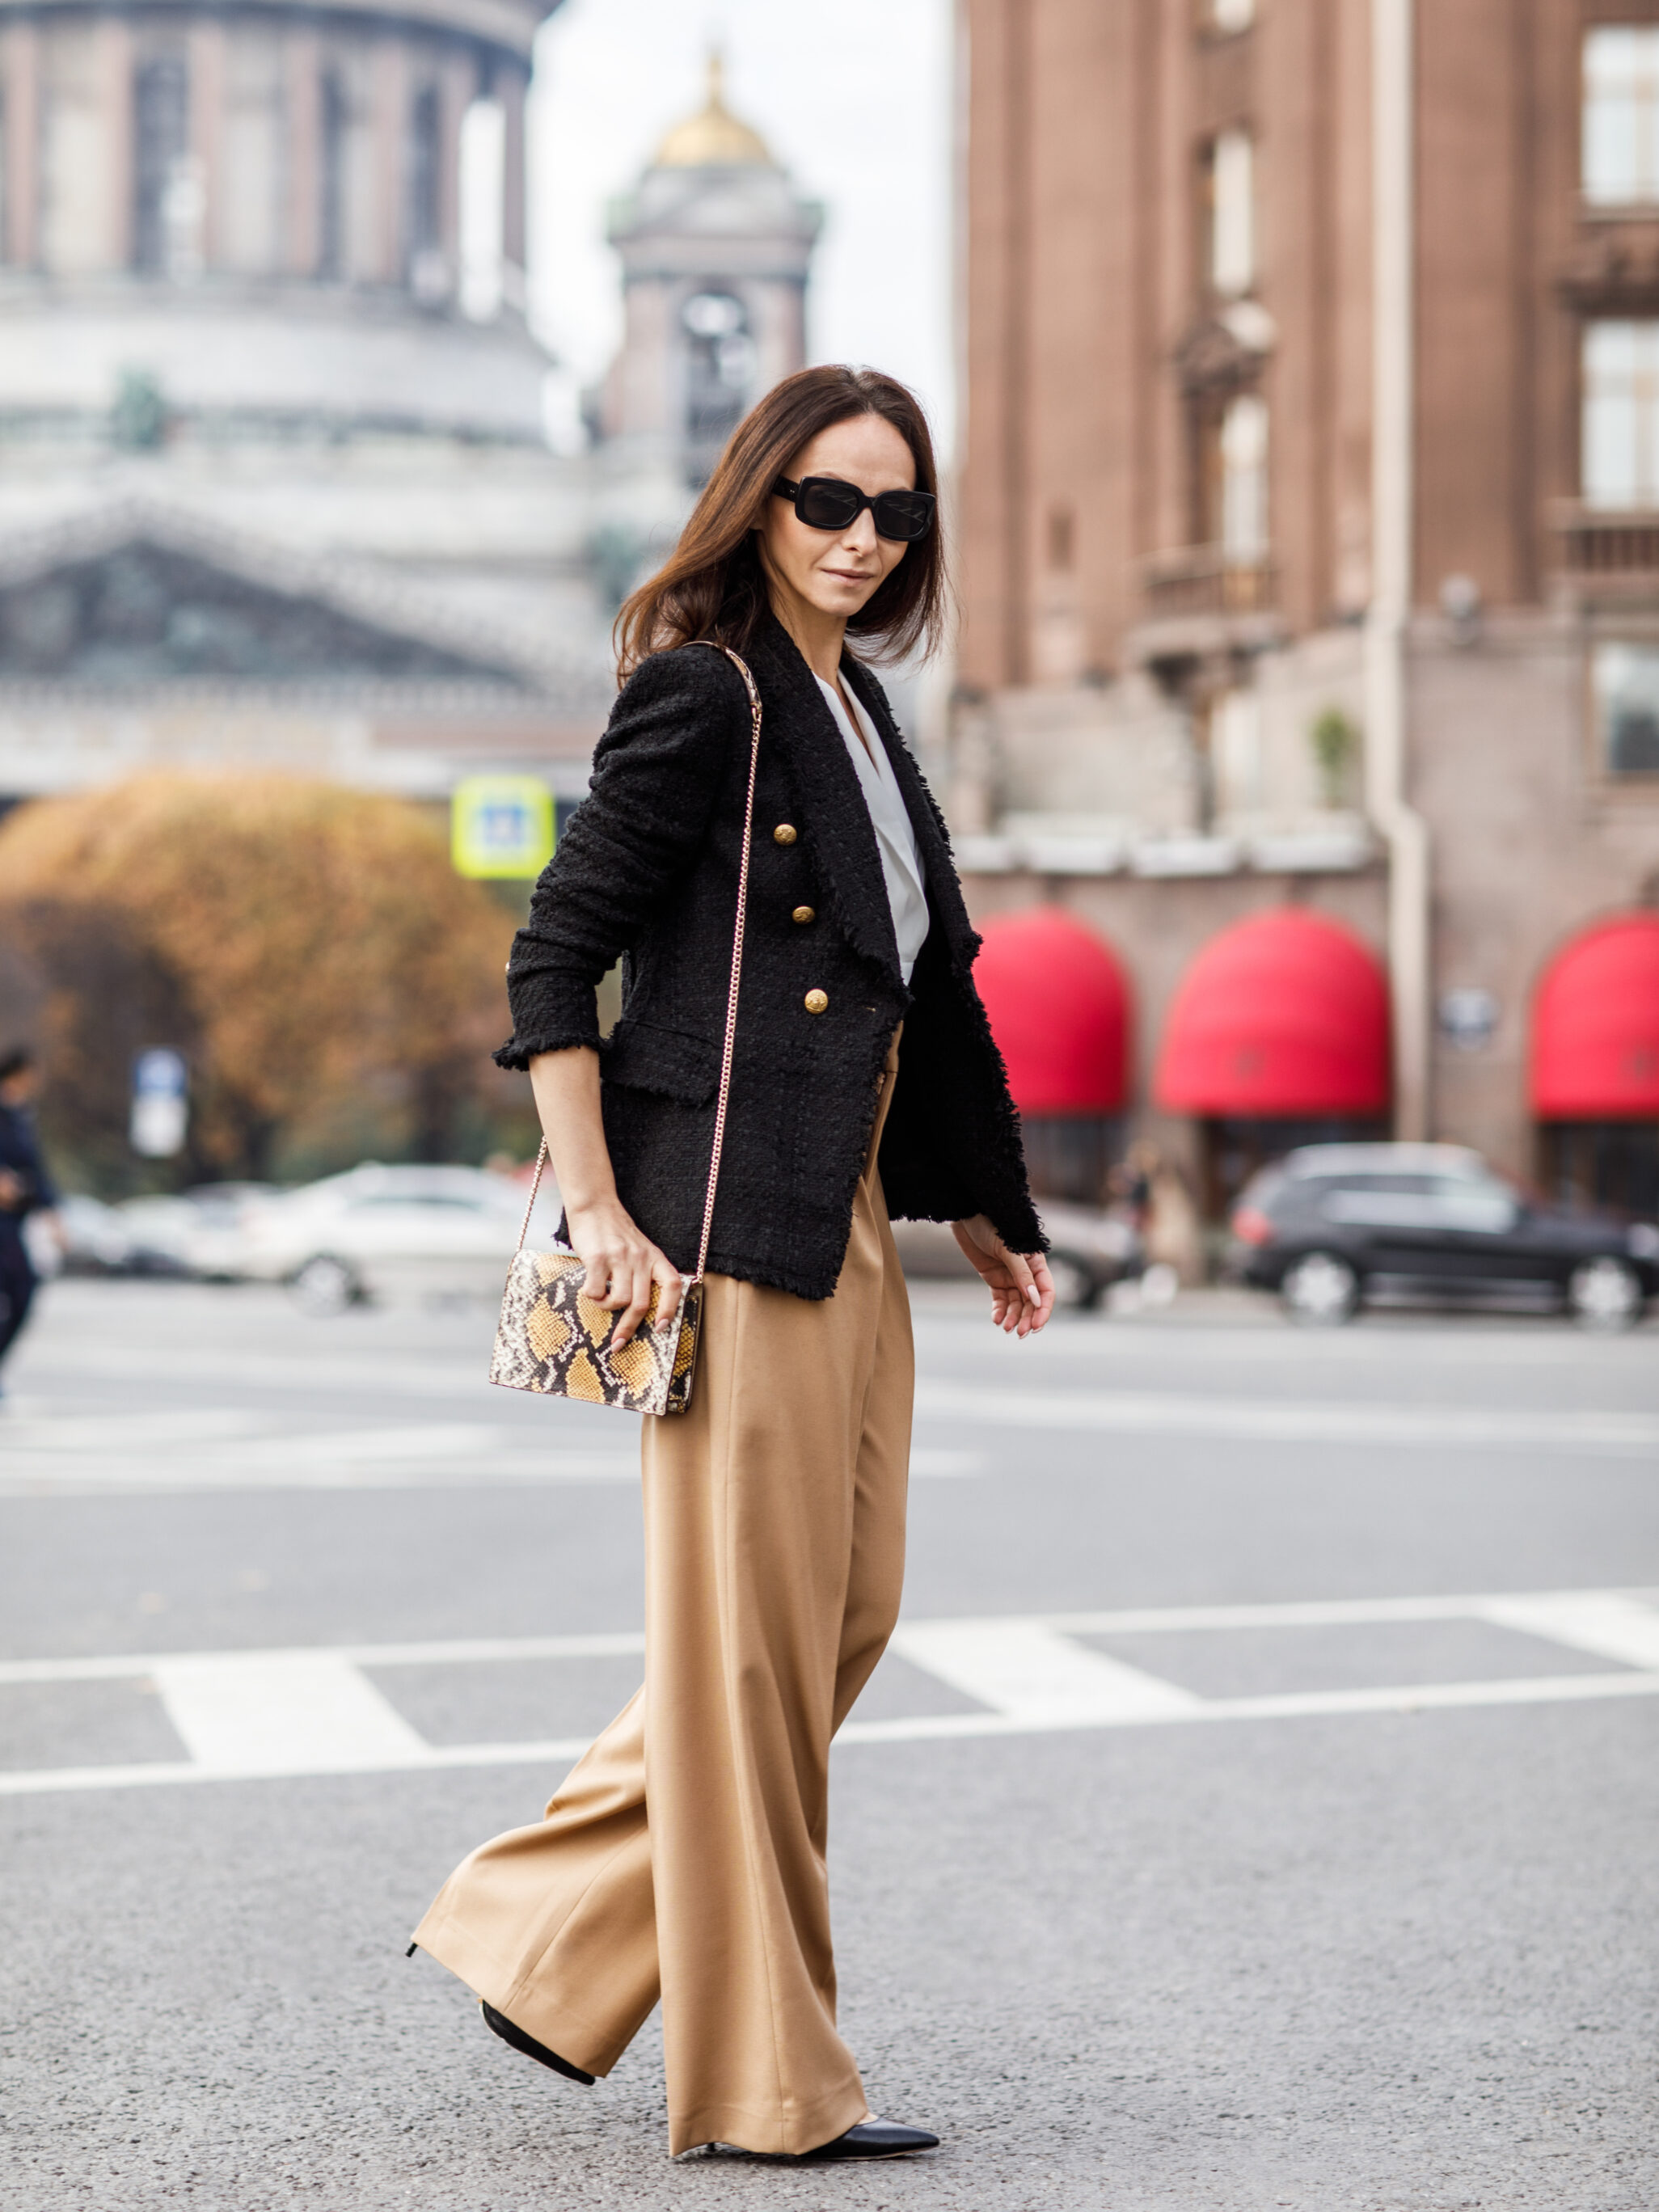 Bright Wide-Leg Pants With A Blazer